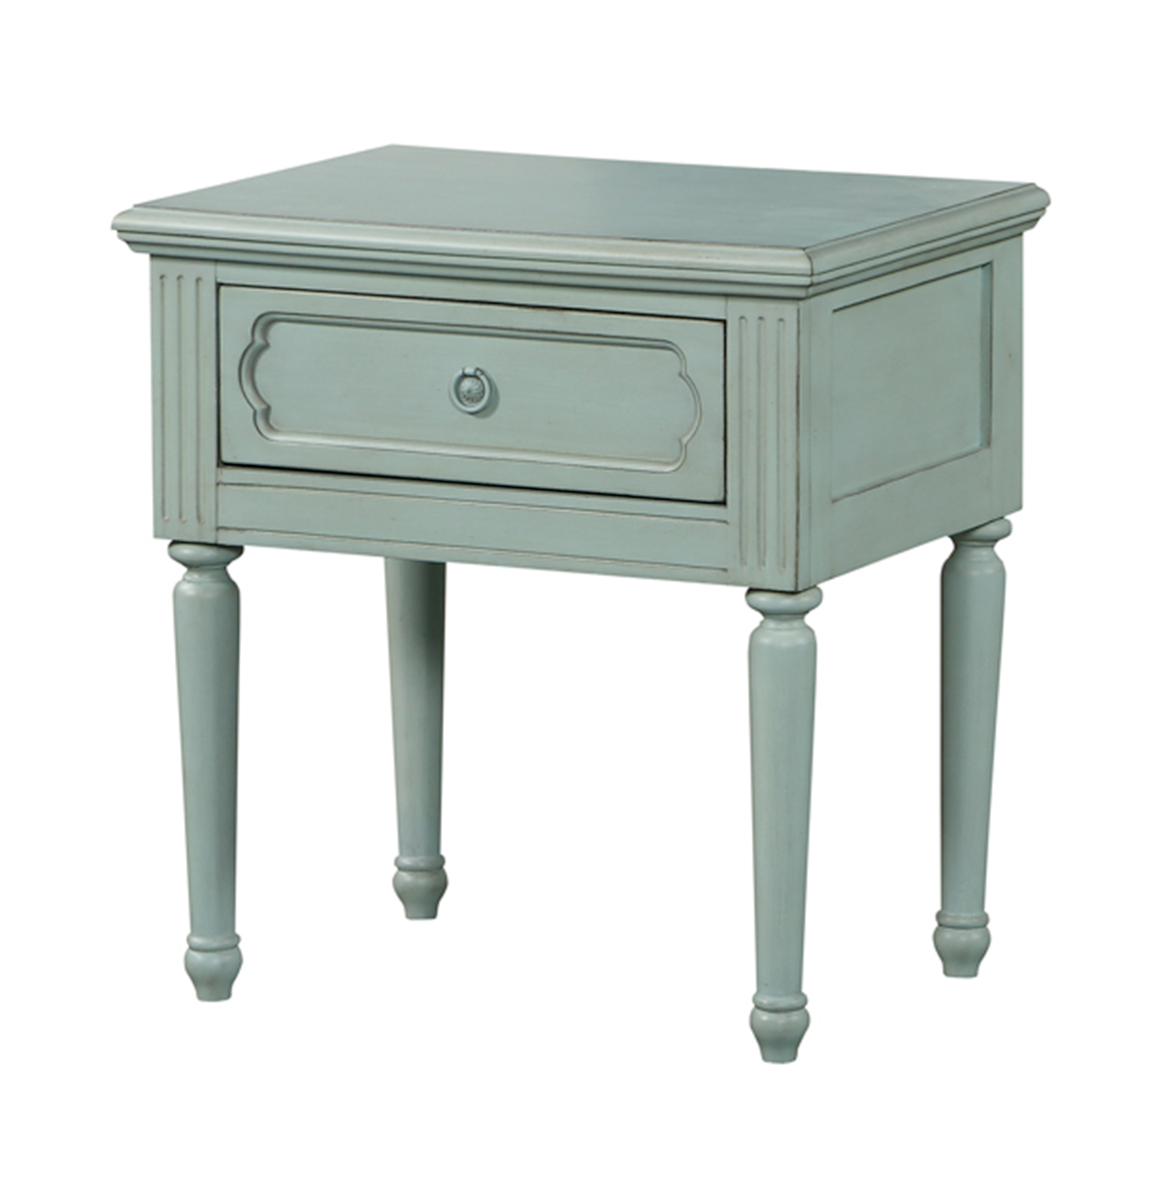 Acme Morre Nightstand - Antique Teal